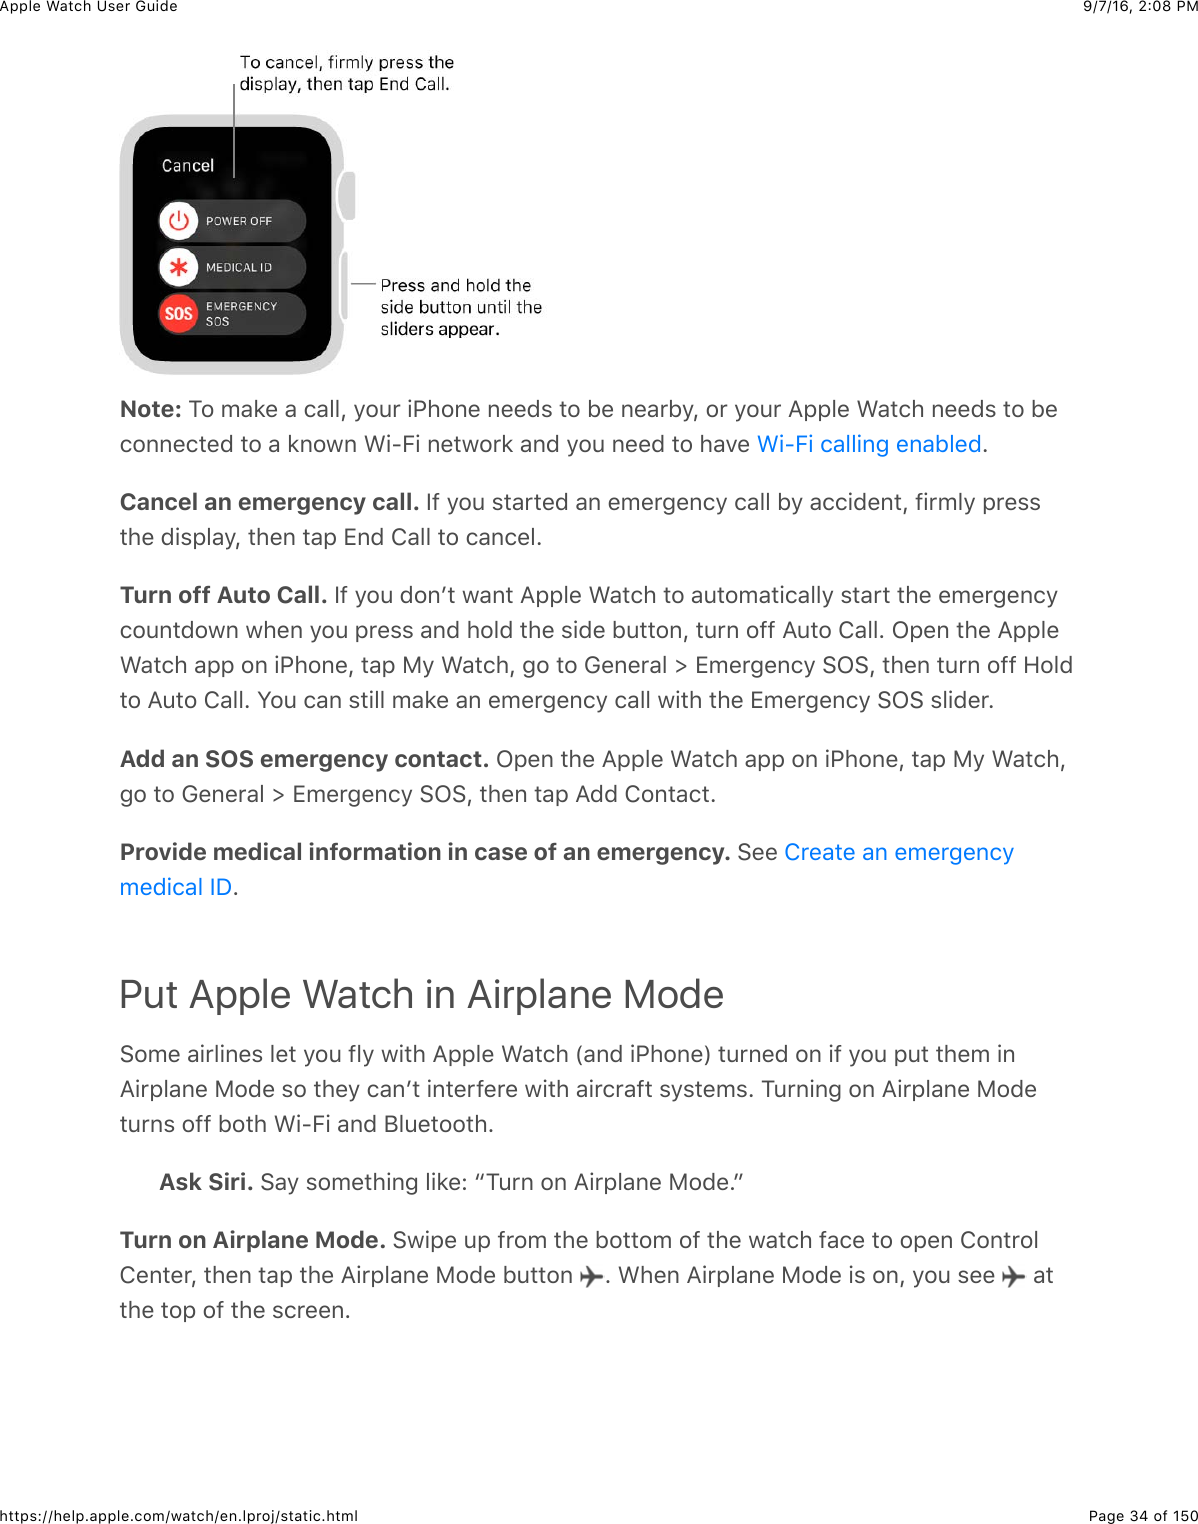 9/7/16, 2)08 PMApple Watch User GuidePage 34 of 150https://help.apple.com/watch/en.lproj/static.htmlNote: 1#&amp;5&apos;8%&amp;&apos;&amp;(&apos;&quot;&quot;J&amp;/#4*&amp;+G)#,%&amp;,%%0$&amp;3#&amp;B%&amp;,%&apos;*B/J&amp;#*&amp;/#4*&amp;=22&quot;%&amp;&gt;&apos;3()&amp;,%%0$&amp;3#&amp;B%(#,,%(3%0&amp;3#&amp;&apos;&amp;8,#7,&amp;&gt;+?E+&amp;,%37#*8&amp;&apos;,0&amp;/#4&amp;,%%0&amp;3#&amp;)&apos;.%&amp; CCancel an emergency call. Y@&amp;/#4&amp;$3&apos;*3%0&amp;&apos;,&amp;%5%*-%,(/&amp;(&apos;&quot;&quot;&amp;B/&amp;&apos;((+0%,3J&amp;@+*5&quot;/&amp;2*%$$3)%&amp;0+$2&quot;&apos;/J&amp;3)%,&amp;3&apos;2&amp;Z,0&amp;!&apos;&quot;&quot;&amp;3#&amp;(&apos;,(%&quot;CTurn off Auto Call. Y@&amp;/#4&amp;0#,W3&amp;7&apos;,3&amp;=22&quot;%&amp;&gt;&apos;3()&amp;3#&amp;&apos;43#5&apos;3+(&apos;&quot;&quot;/&amp;$3&apos;*3&amp;3)%&amp;%5%*-%,(/(#4,30#7,&amp;7)%,&amp;/#4&amp;2*%$$&amp;&apos;,0&amp;)#&quot;0&amp;3)%&amp;$+0%&amp;B433#,J&amp;34*,&amp;#@@&amp;=43#&amp;!&apos;&quot;&quot;C&amp;L2%,&amp;3)%&amp;=22&quot;%&gt;&apos;3()&amp;&apos;22&amp;#,&amp;+G)#,%J&amp;3&apos;2&amp;F/&amp;&gt;&apos;3()J&amp;-#&amp;3#&amp;D%,%*&apos;&quot;&amp;d&amp;Z5%*-%,(/&amp;6L6J&amp;3)%,&amp;34*,&amp;#@@&amp;9#&quot;03#&amp;=43#&amp;!&apos;&quot;&quot;C&amp;S#4&amp;(&apos;,&amp;$3+&quot;&quot;&amp;5&apos;8%&amp;&apos;,&amp;%5%*-%,(/&amp;(&apos;&quot;&quot;&amp;7+3)&amp;3)%&amp;Z5%*-%,(/&amp;6L6&amp;$&quot;+0%*CAdd an SOS emergency contact. L2%,&amp;3)%&amp;=22&quot;%&amp;&gt;&apos;3()&amp;&apos;22&amp;#,&amp;+G)#,%J&amp;3&apos;2&amp;F/&amp;&gt;&apos;3()J-#&amp;3#&amp;D%,%*&apos;&quot;&amp;d&amp;Z5%*-%,(/&amp;6L6J&amp;3)%,&amp;3&apos;2&amp;=00&amp;!#,3&apos;(3CProvide medical information in case of an emergency. 6%%&amp;CPut Apple Watch in Airplane Mode6#5%&amp;&apos;+*&quot;+,%$&amp;&quot;%3&amp;/#4&amp;@&quot;/&amp;7+3)&amp;=22&quot;%&amp;&gt;&apos;3()&amp;P&apos;,0&amp;+G)#,%R&amp;34*,%0&amp;#,&amp;+@&amp;/#4&amp;243&amp;3)%5&amp;+,=+*2&quot;&apos;,%&amp;F#0%&amp;$#&amp;3)%/&amp;(&apos;,W3&amp;+,3%*@%*%&amp;7+3)&amp;&apos;+*(*&apos;@3&amp;$/$3%5$C&amp;14*,+,-&amp;#,&amp;=+*2&quot;&apos;,%&amp;F#0%34*,$&amp;#@@&amp;B#3)&amp;&gt;+?E+&amp;&apos;,0&amp;;&quot;4%3##3)CAsk Siri. 6&apos;/&amp;$#5%3)+,-&amp;&quot;+8%e&amp;a14*,&amp;#,&amp;=+*2&quot;&apos;,%&amp;F#0%CbTurn on Airplane Mode. 67+2%&amp;42&amp;@*#5&amp;3)%&amp;B#33#5&amp;#@&amp;3)%&amp;7&apos;3()&amp;@&apos;(%&amp;3#&amp;#2%,&amp;!#,3*#&quot;!%,3%*J&amp;3)%,&amp;3&apos;2&amp;3)%&amp;=+*2&quot;&apos;,%&amp;F#0%&amp;B433#,&amp; C&amp;&gt;)%,&amp;=+*2&quot;&apos;,%&amp;F#0%&amp;+$&amp;#,J&amp;/#4&amp;$%%&amp; &amp;&apos;33)%&amp;3#2&amp;#@&amp;3)%&amp;$(*%%,C&gt;+?E+&amp;(&apos;&quot;&quot;+,-&amp;%,&apos;B&quot;%0!*%&apos;3%&amp;&apos;,&amp;%5%*-%,(/5%0+(&apos;&quot;&amp;YI